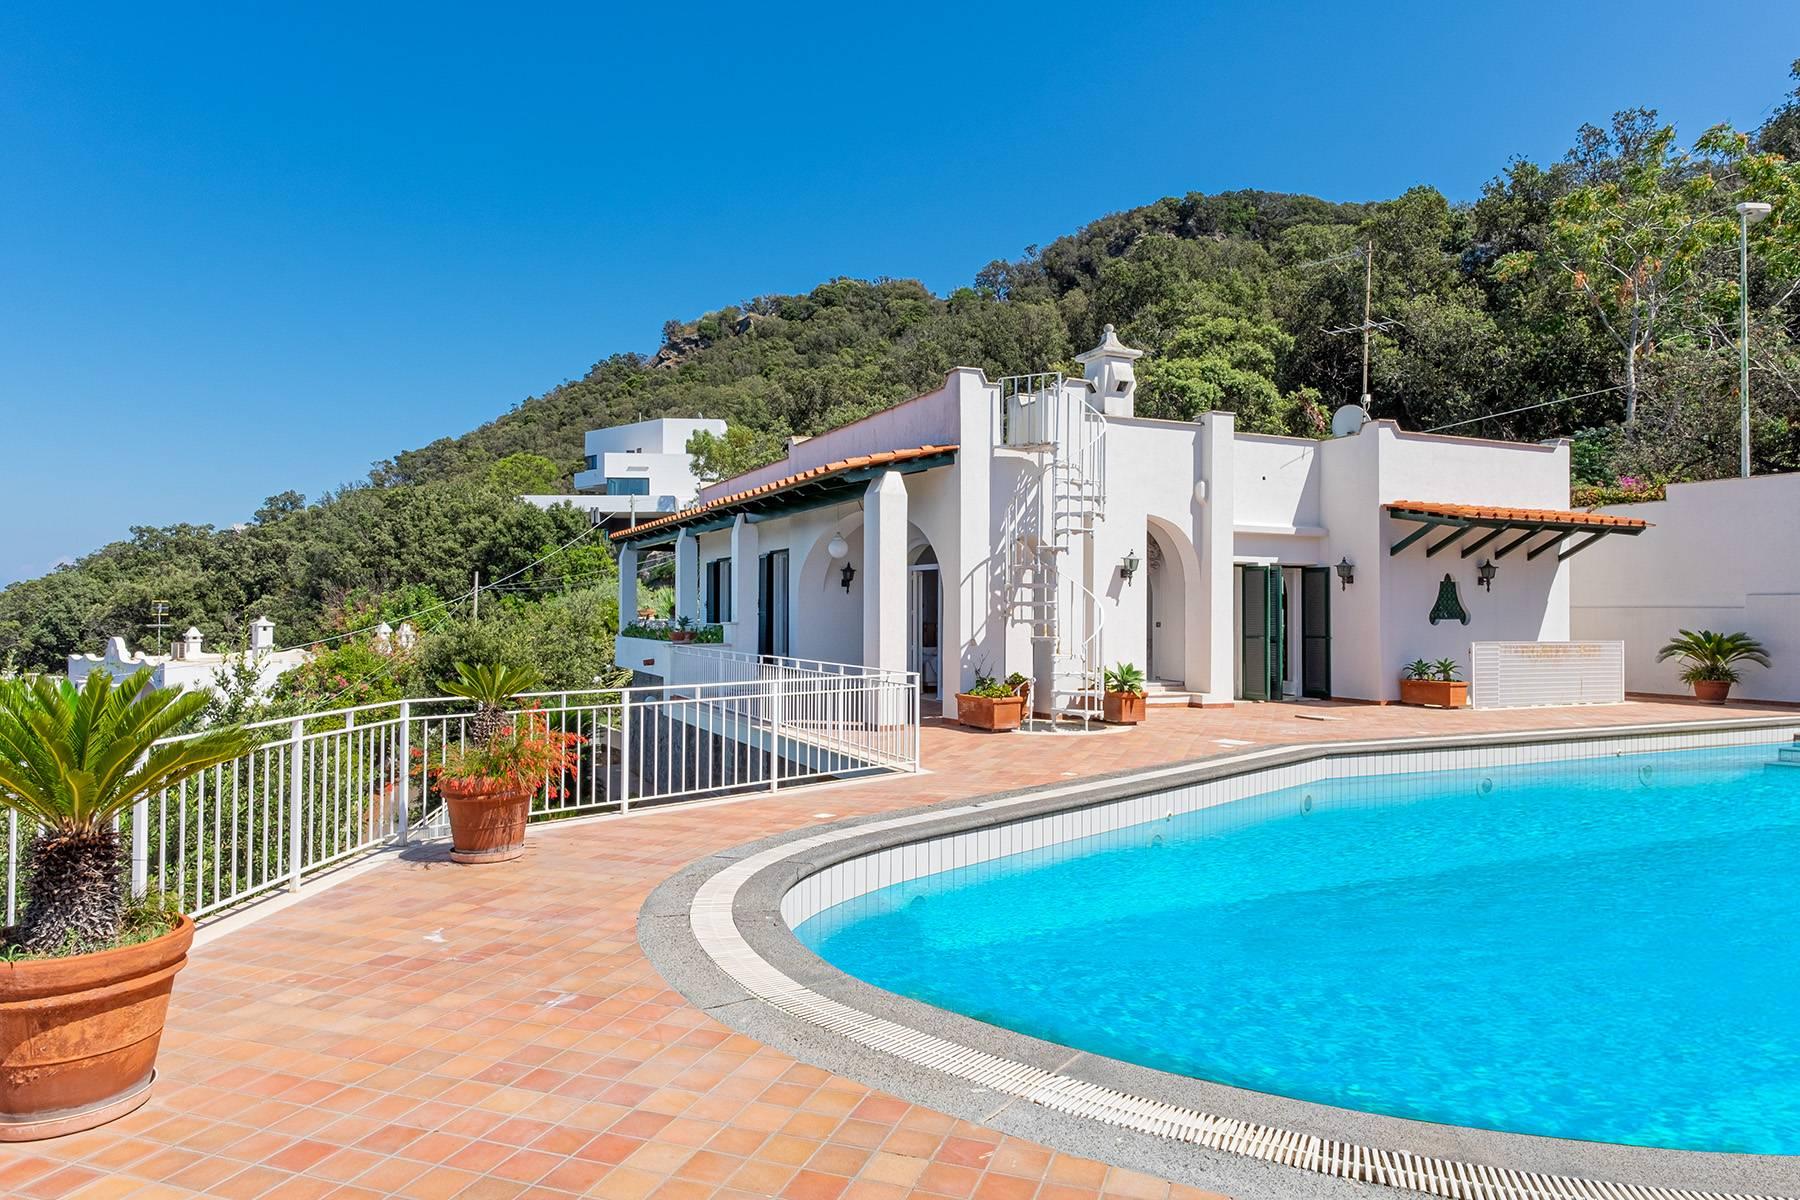 Mediterranean Villa pied dans l'eau with pool and private access to the sea - 1